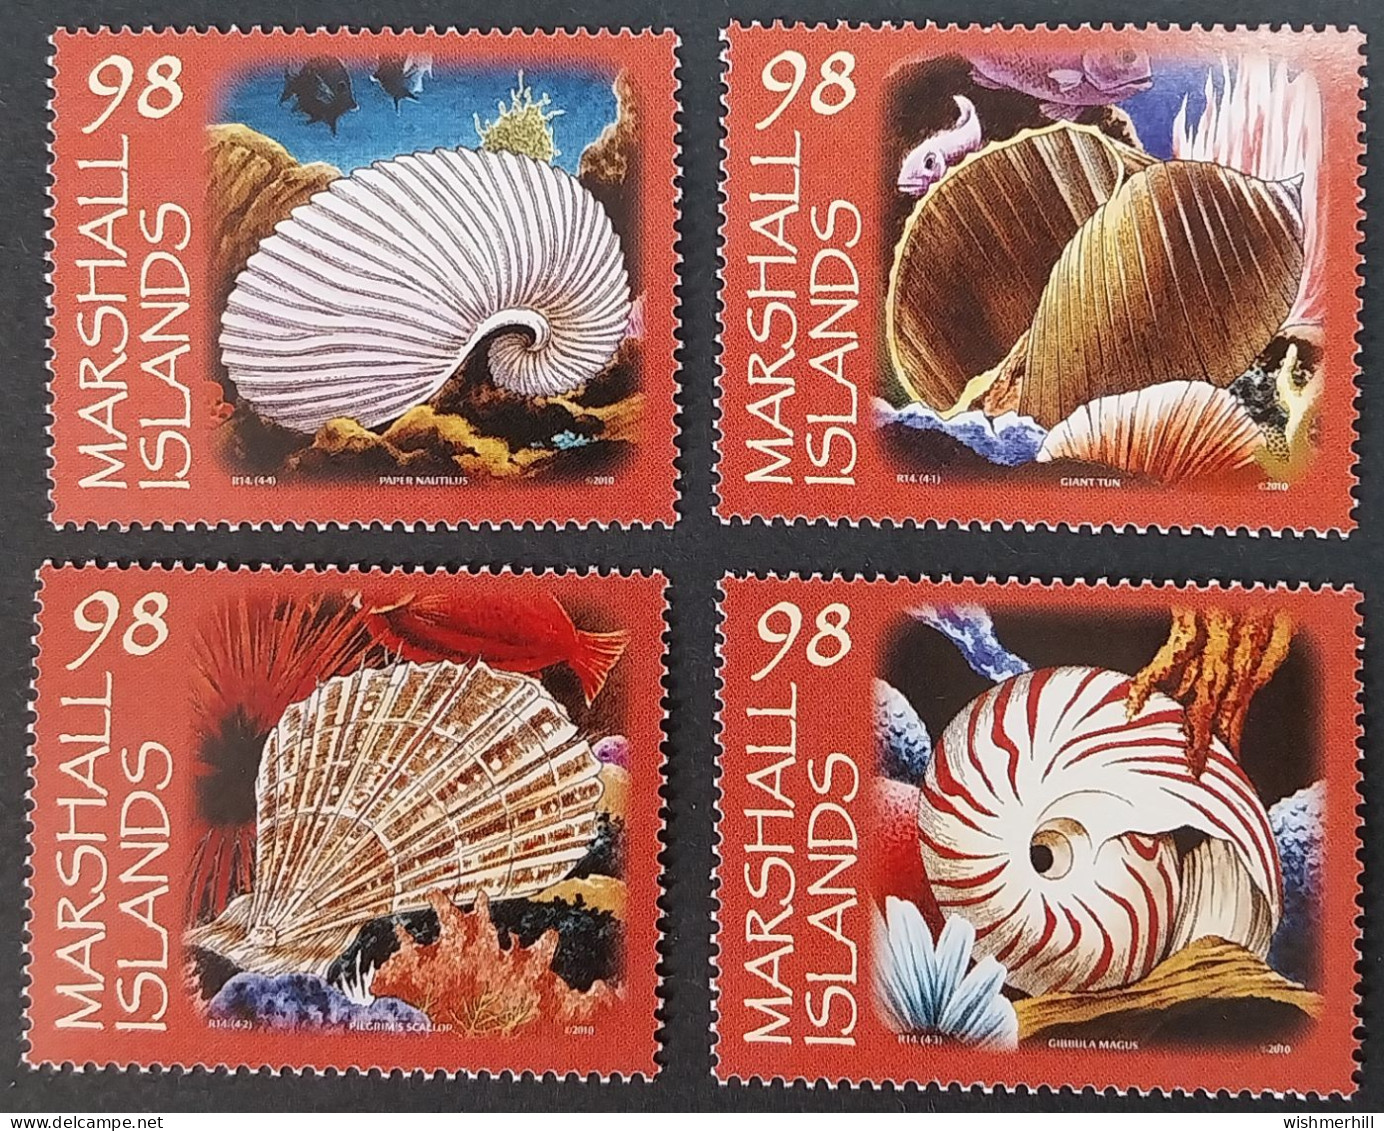 Coquillages Shells // Série Complète Neuve ** MNH ; Marshall YT 2484/2487 (2010) Cote 8 € - Marshallinseln